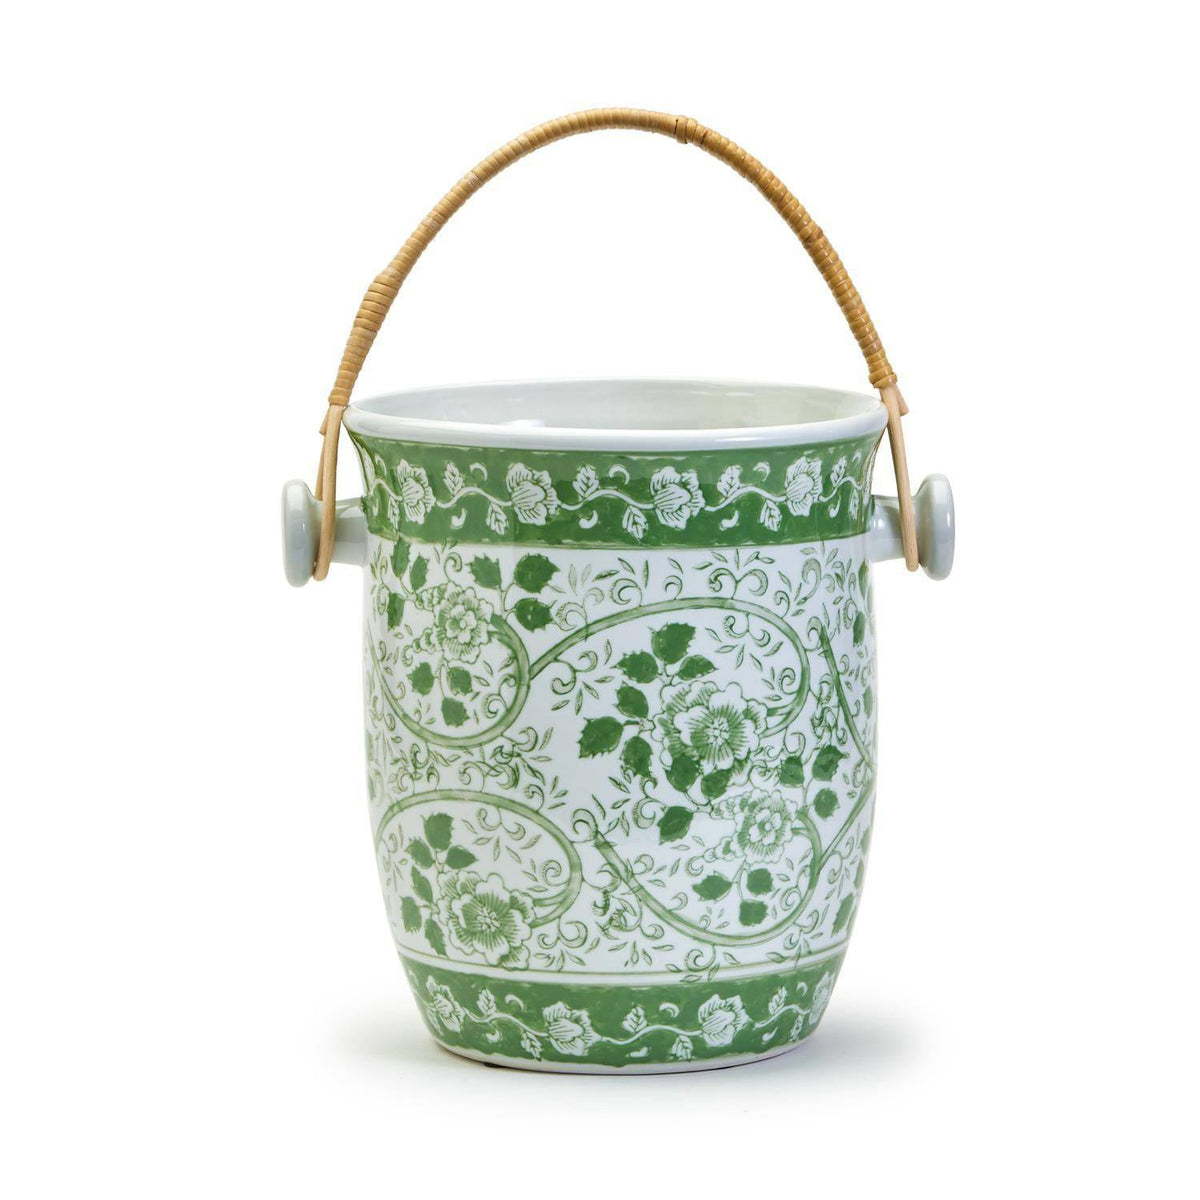 Countryside Cooler Bucket with Woven Cane Handles - The Preppy Bunny